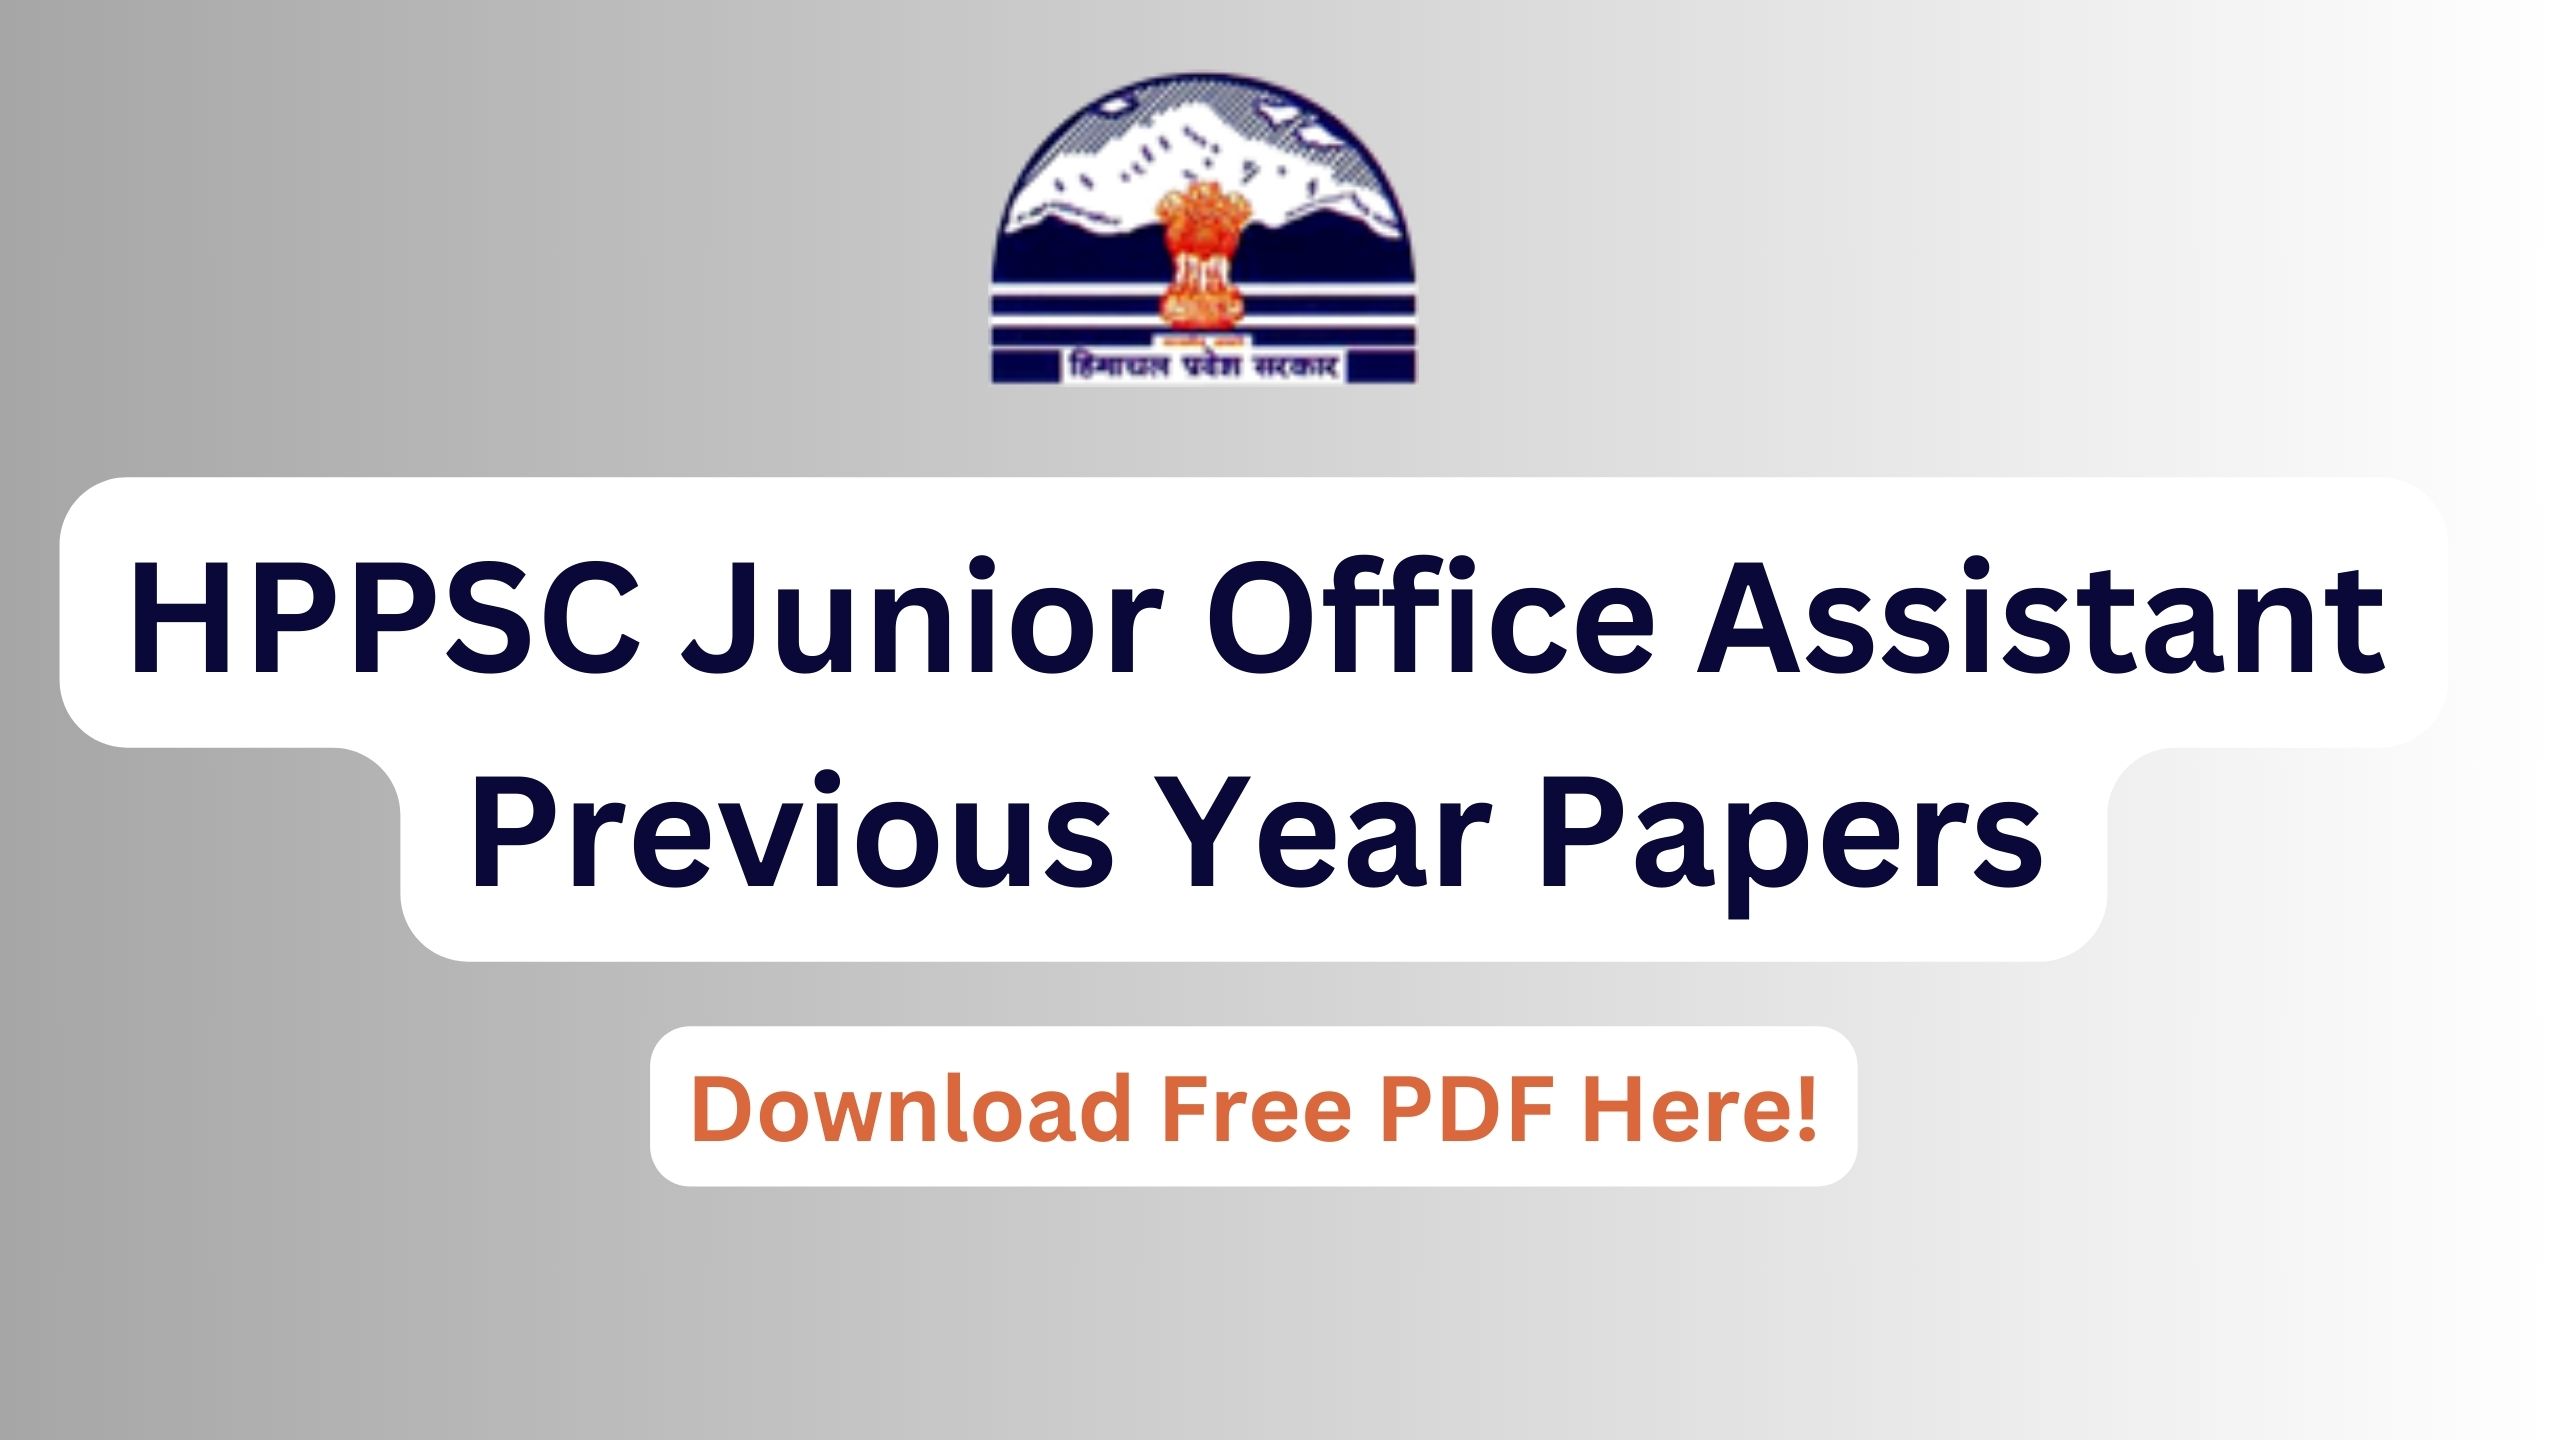 HPPSC Junior Office Assistant Previous Year Papers, Download Old Paper!